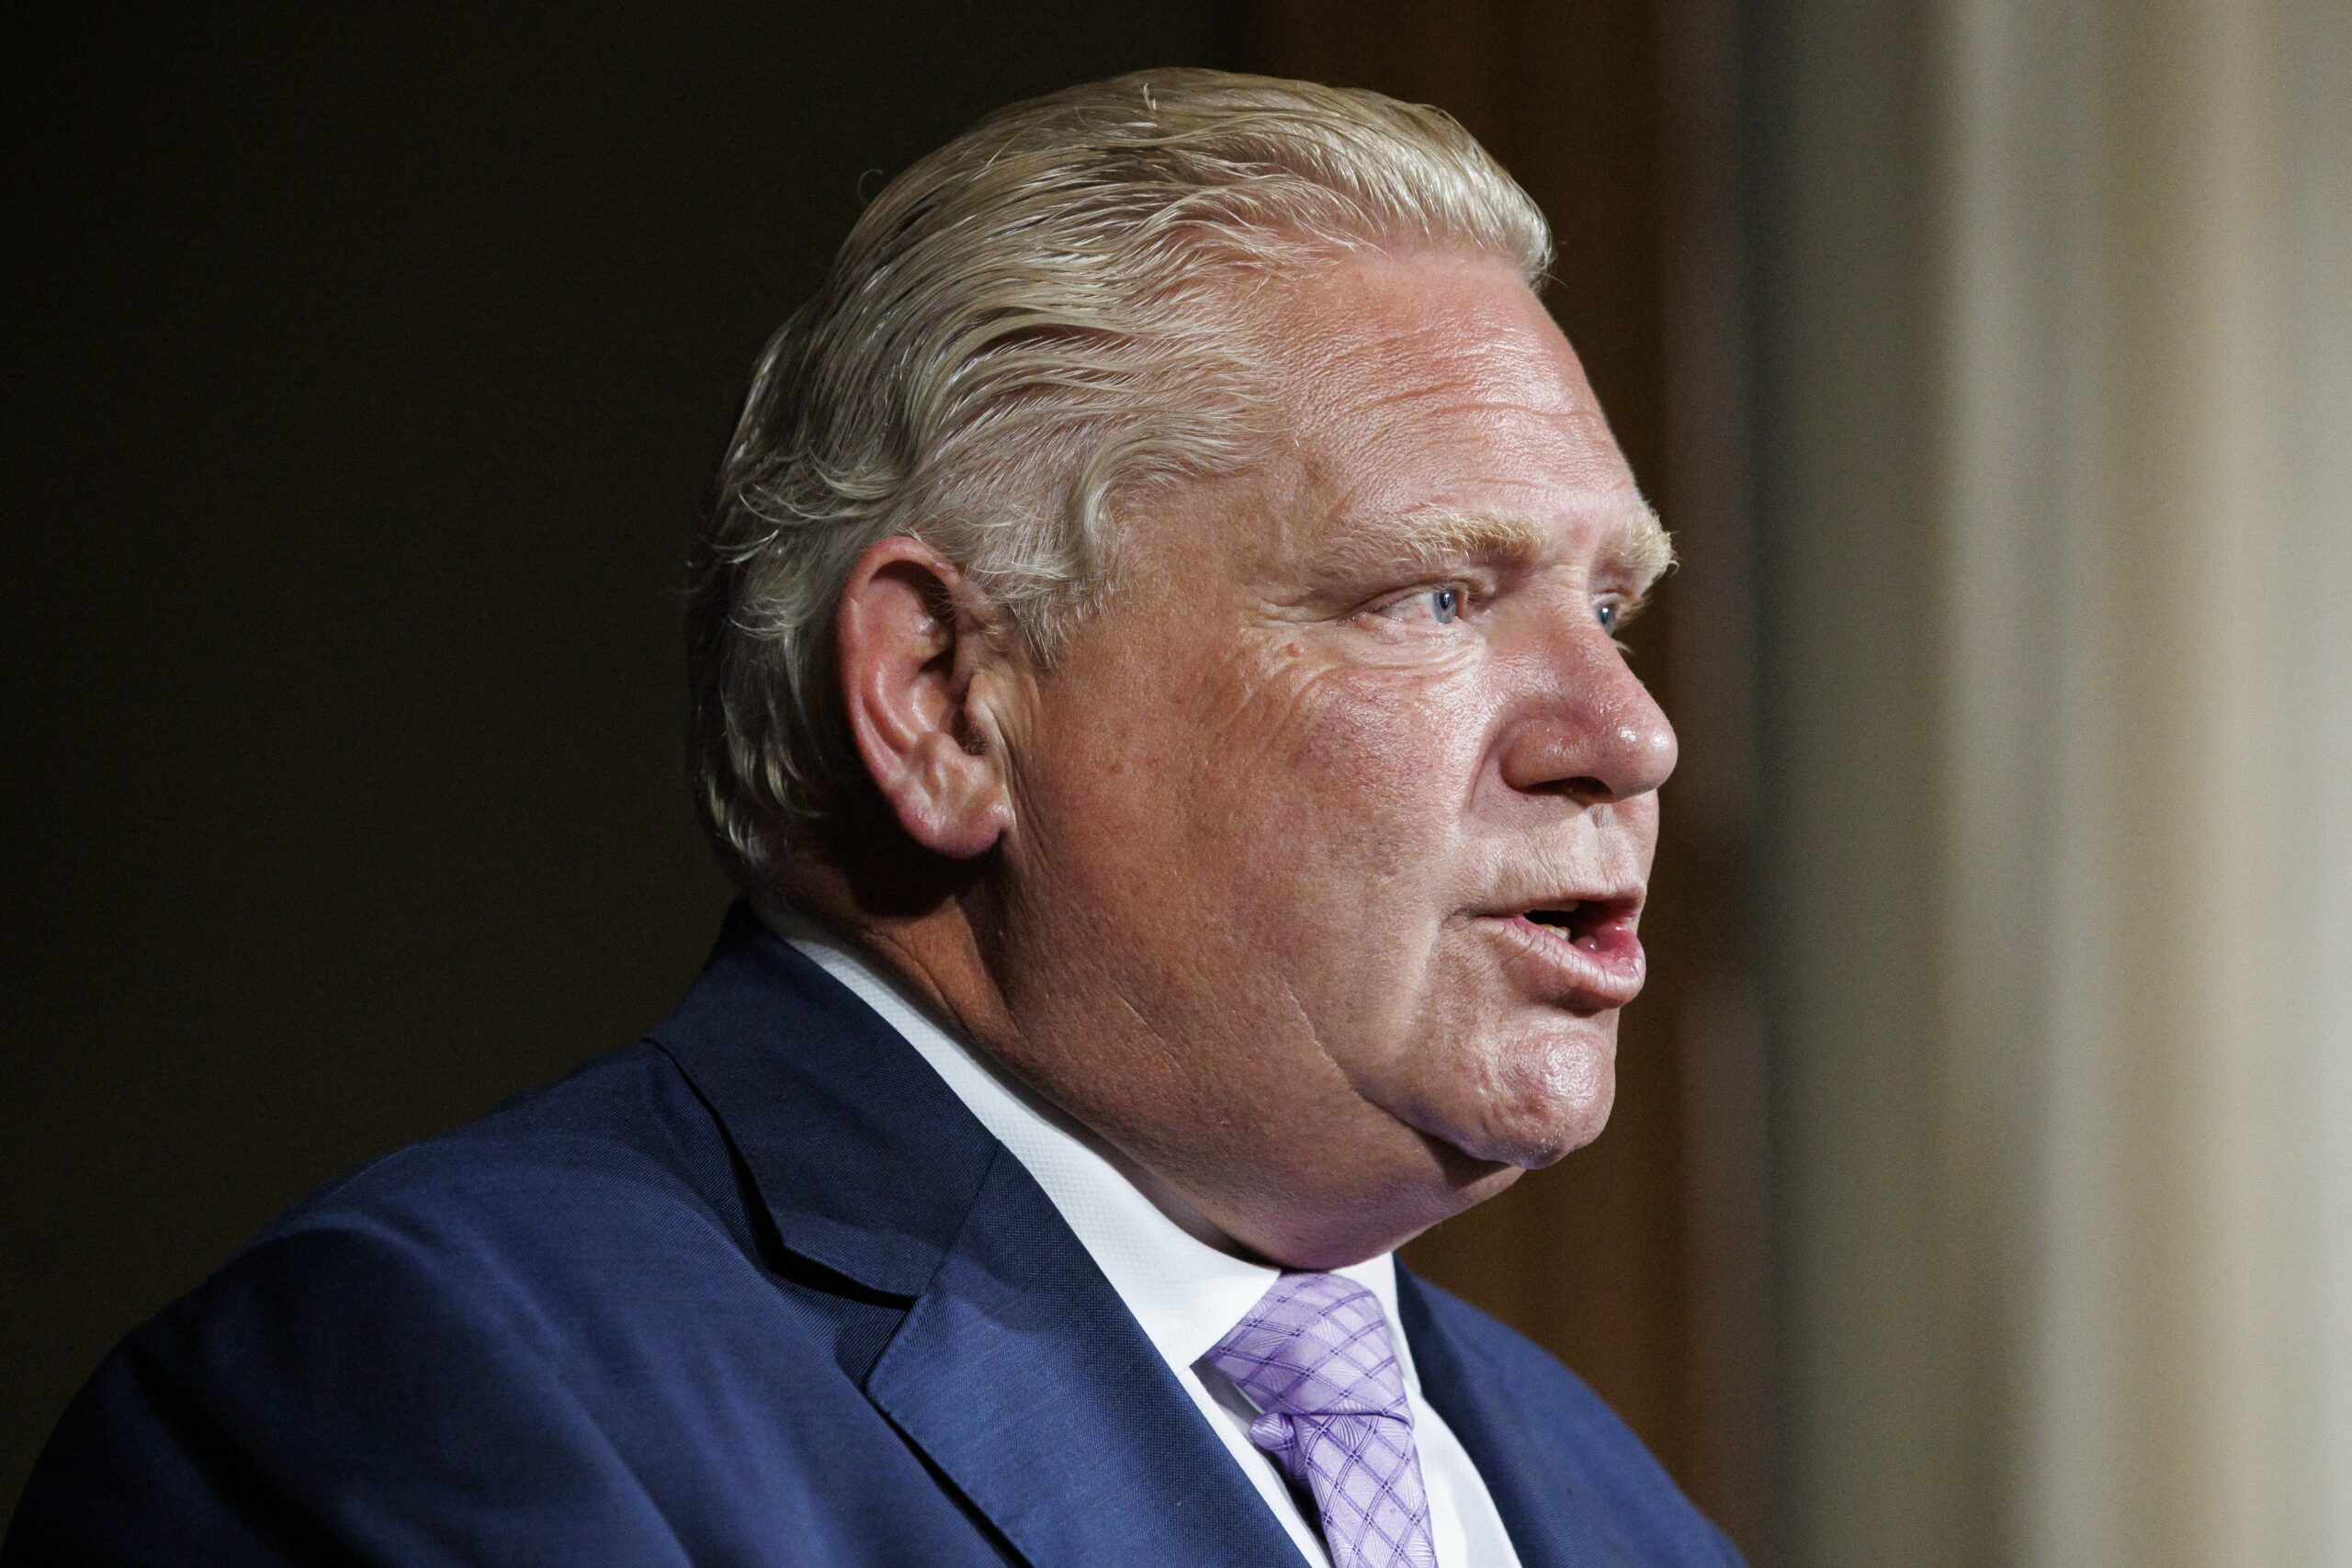 No fast fix coming for Ontario's inundated hospitals: Ford